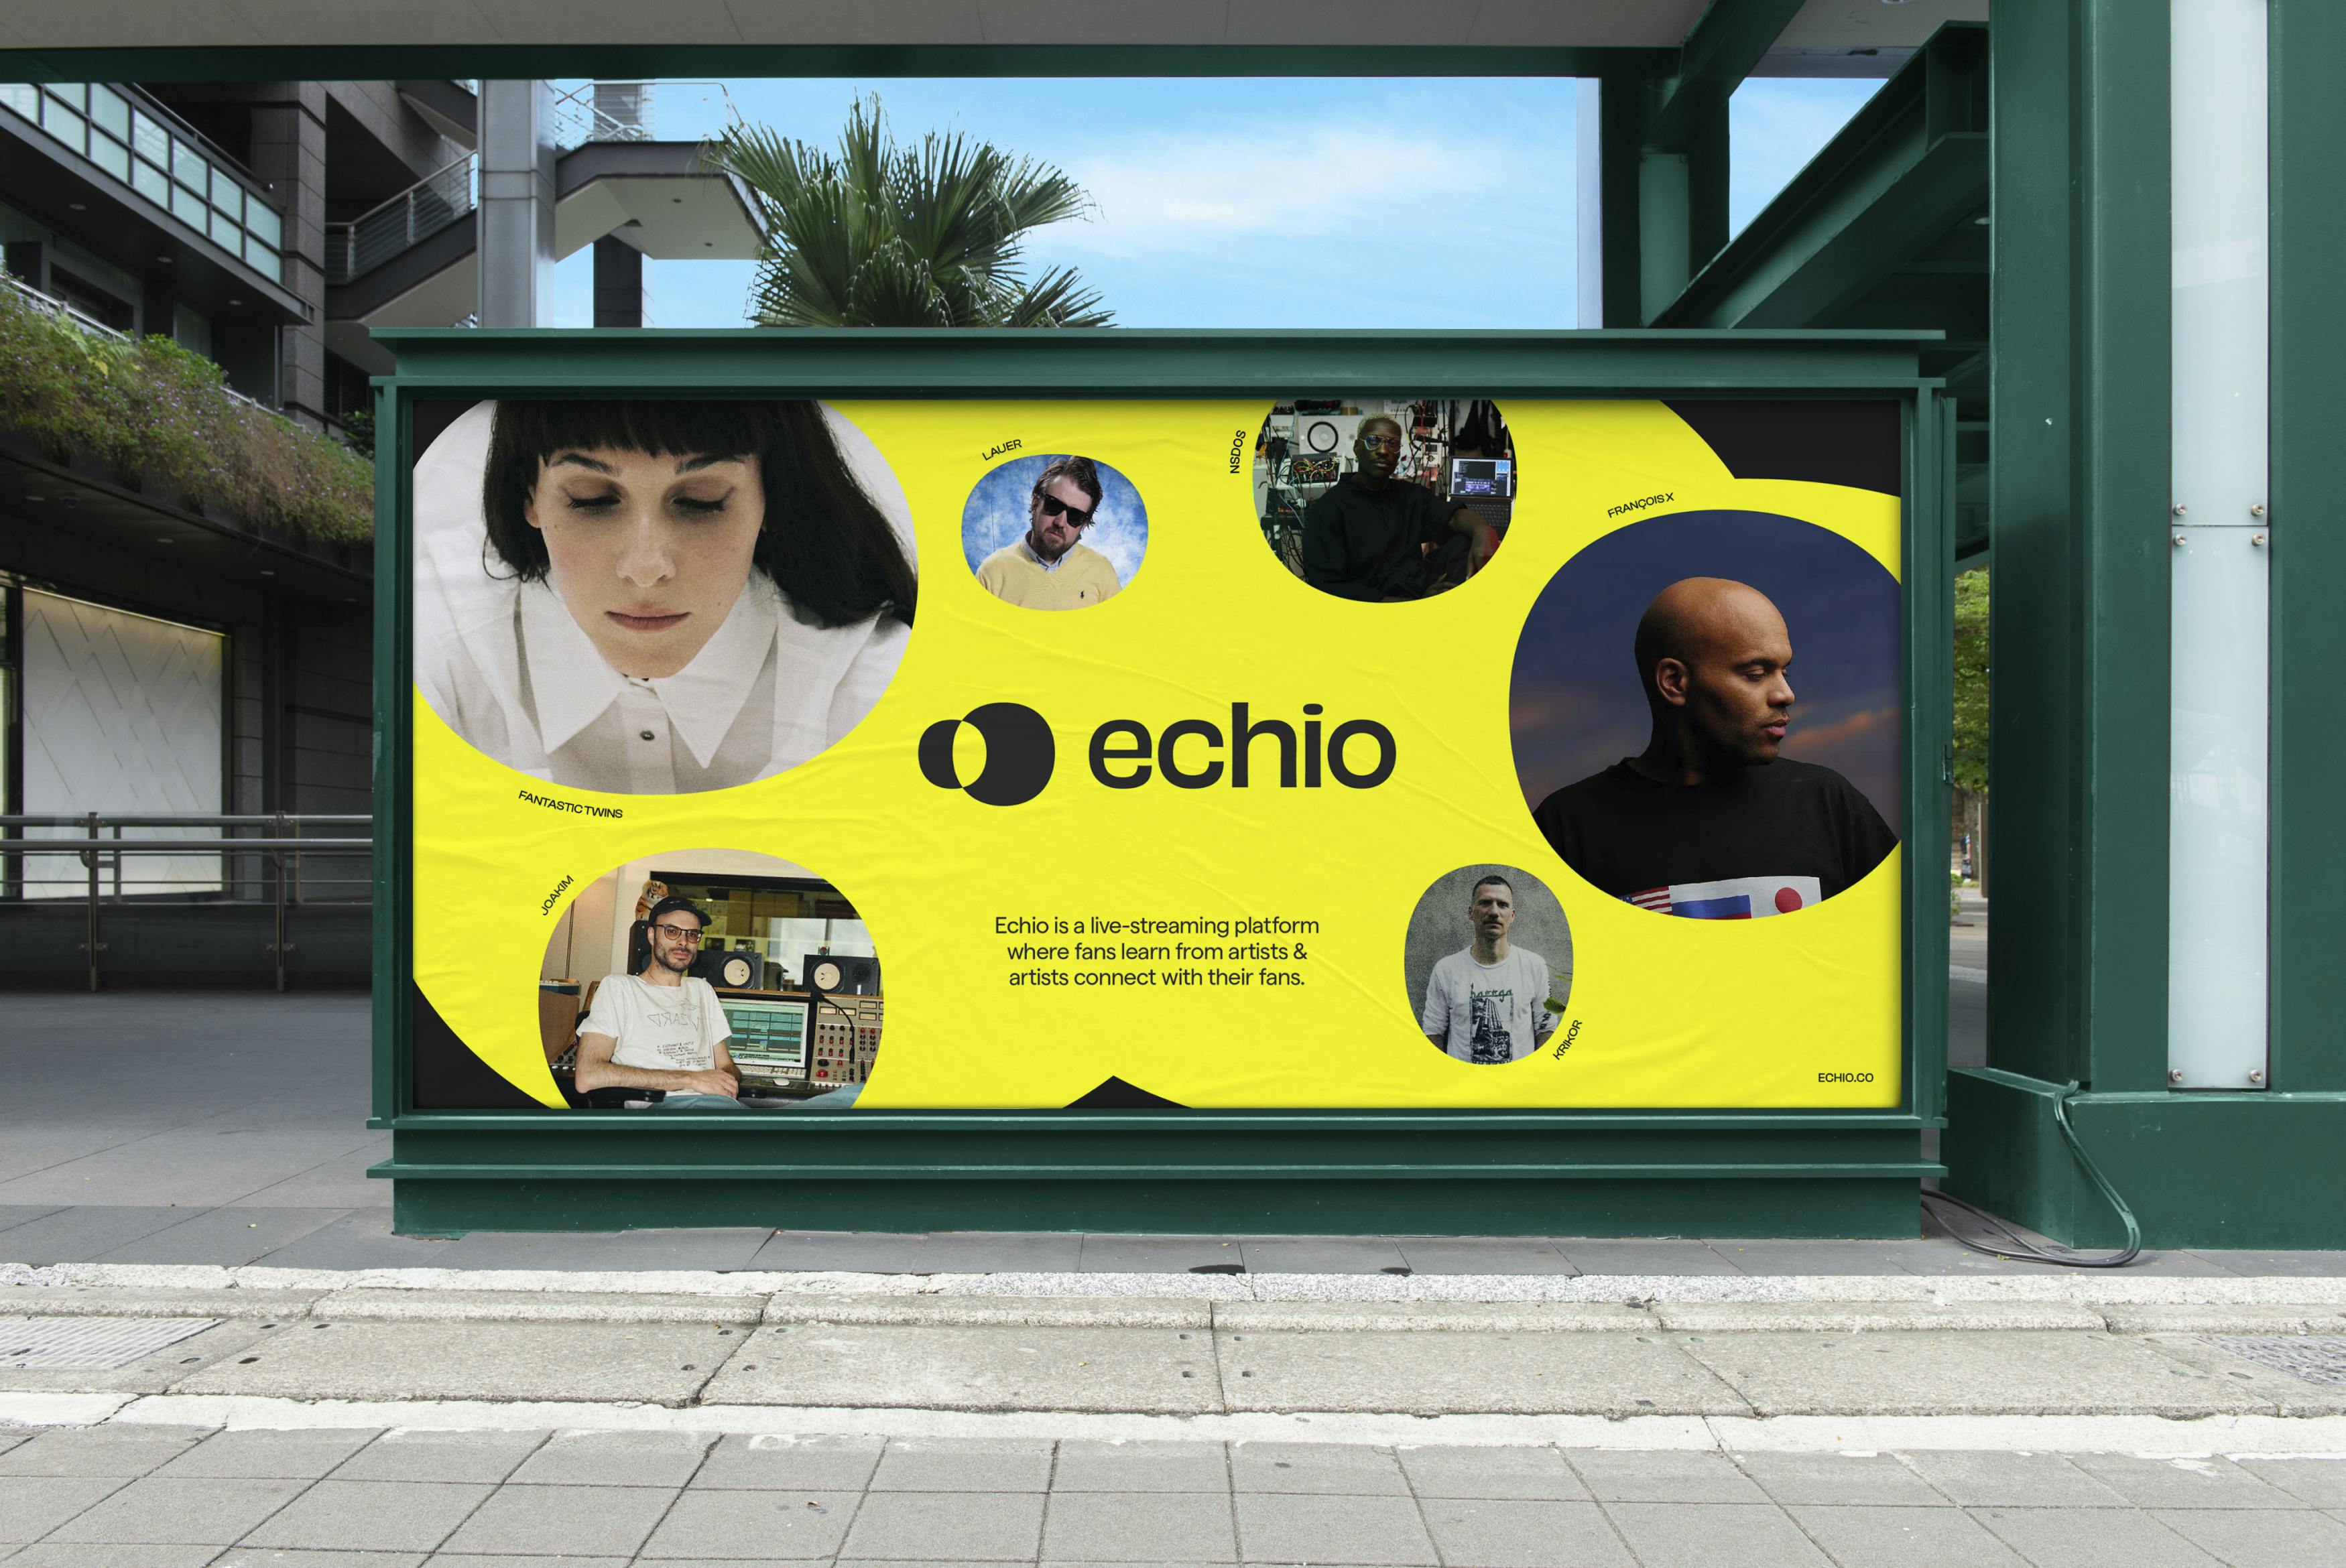 Poster ad for Echio featuring its new branding.